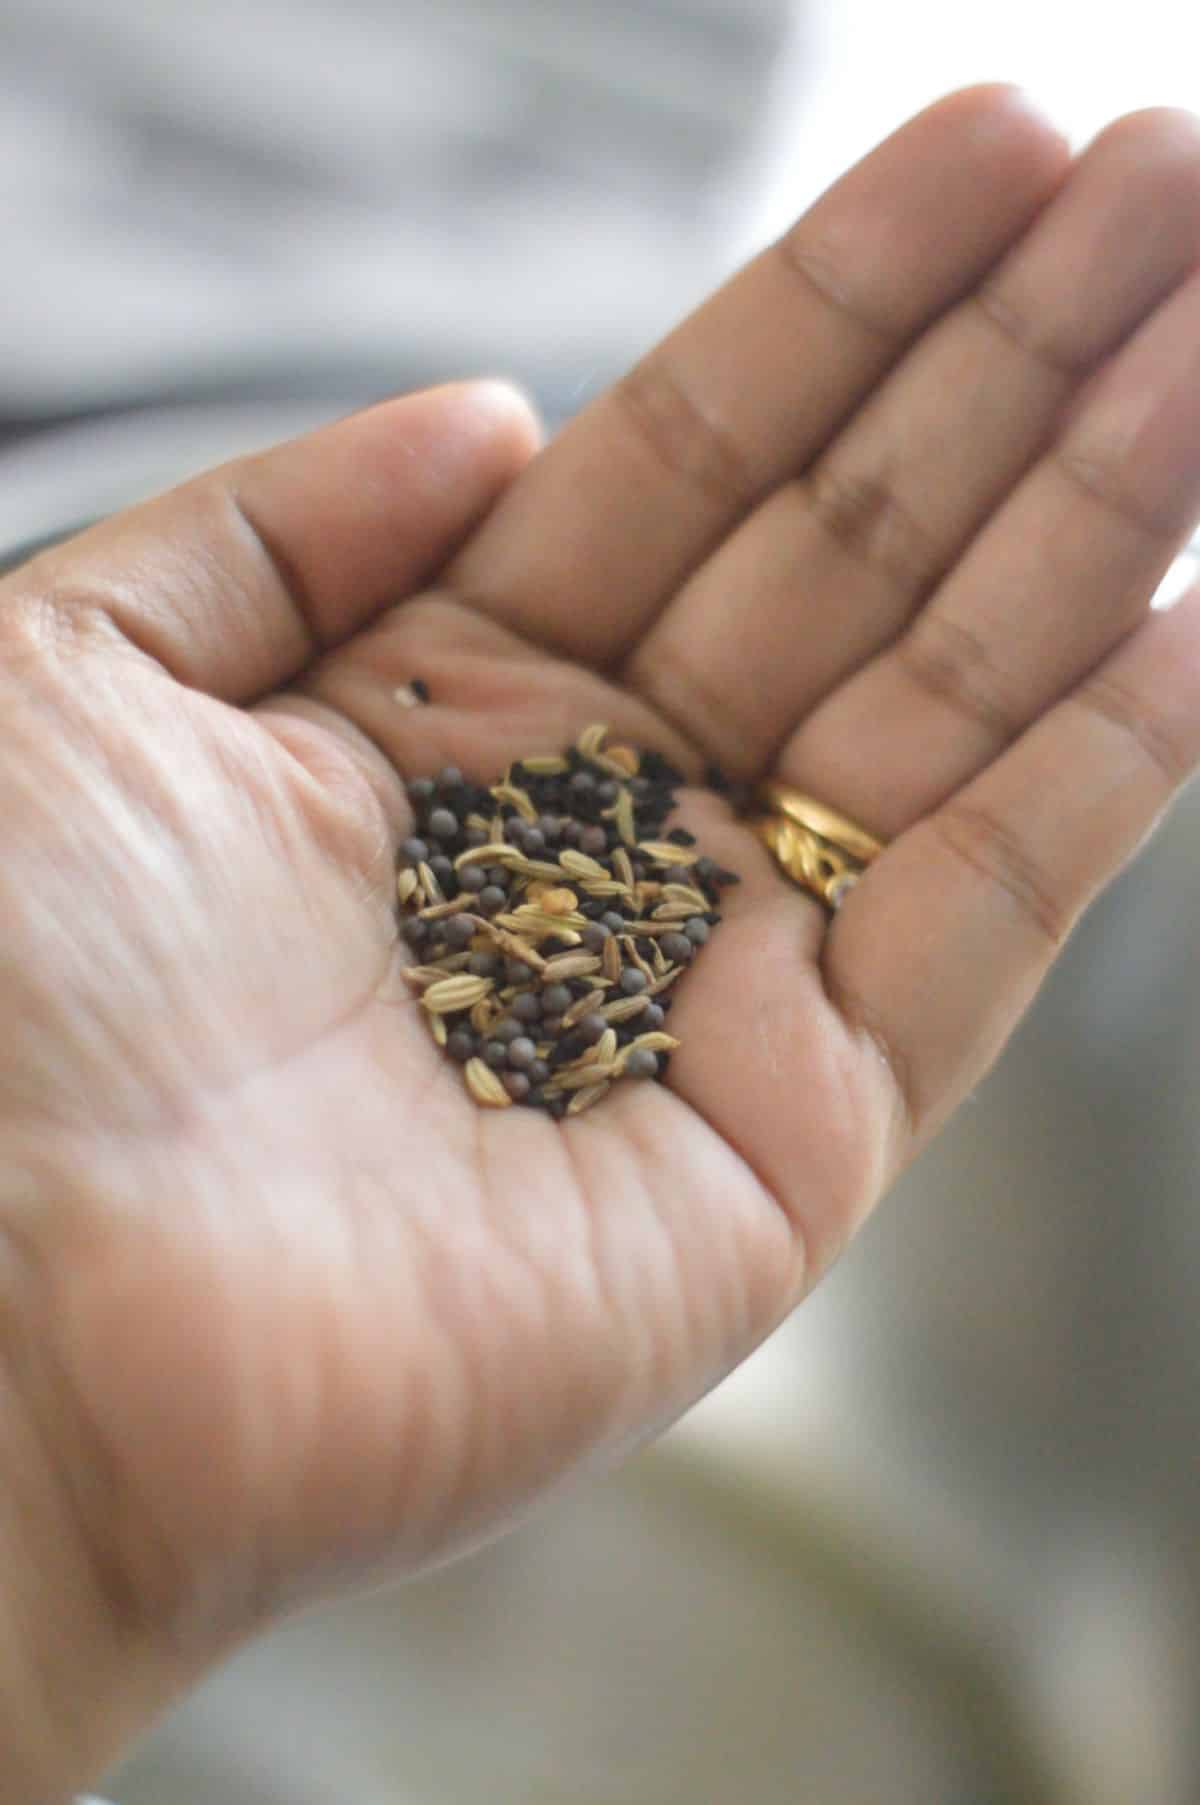 Different types of seeds on a palm.